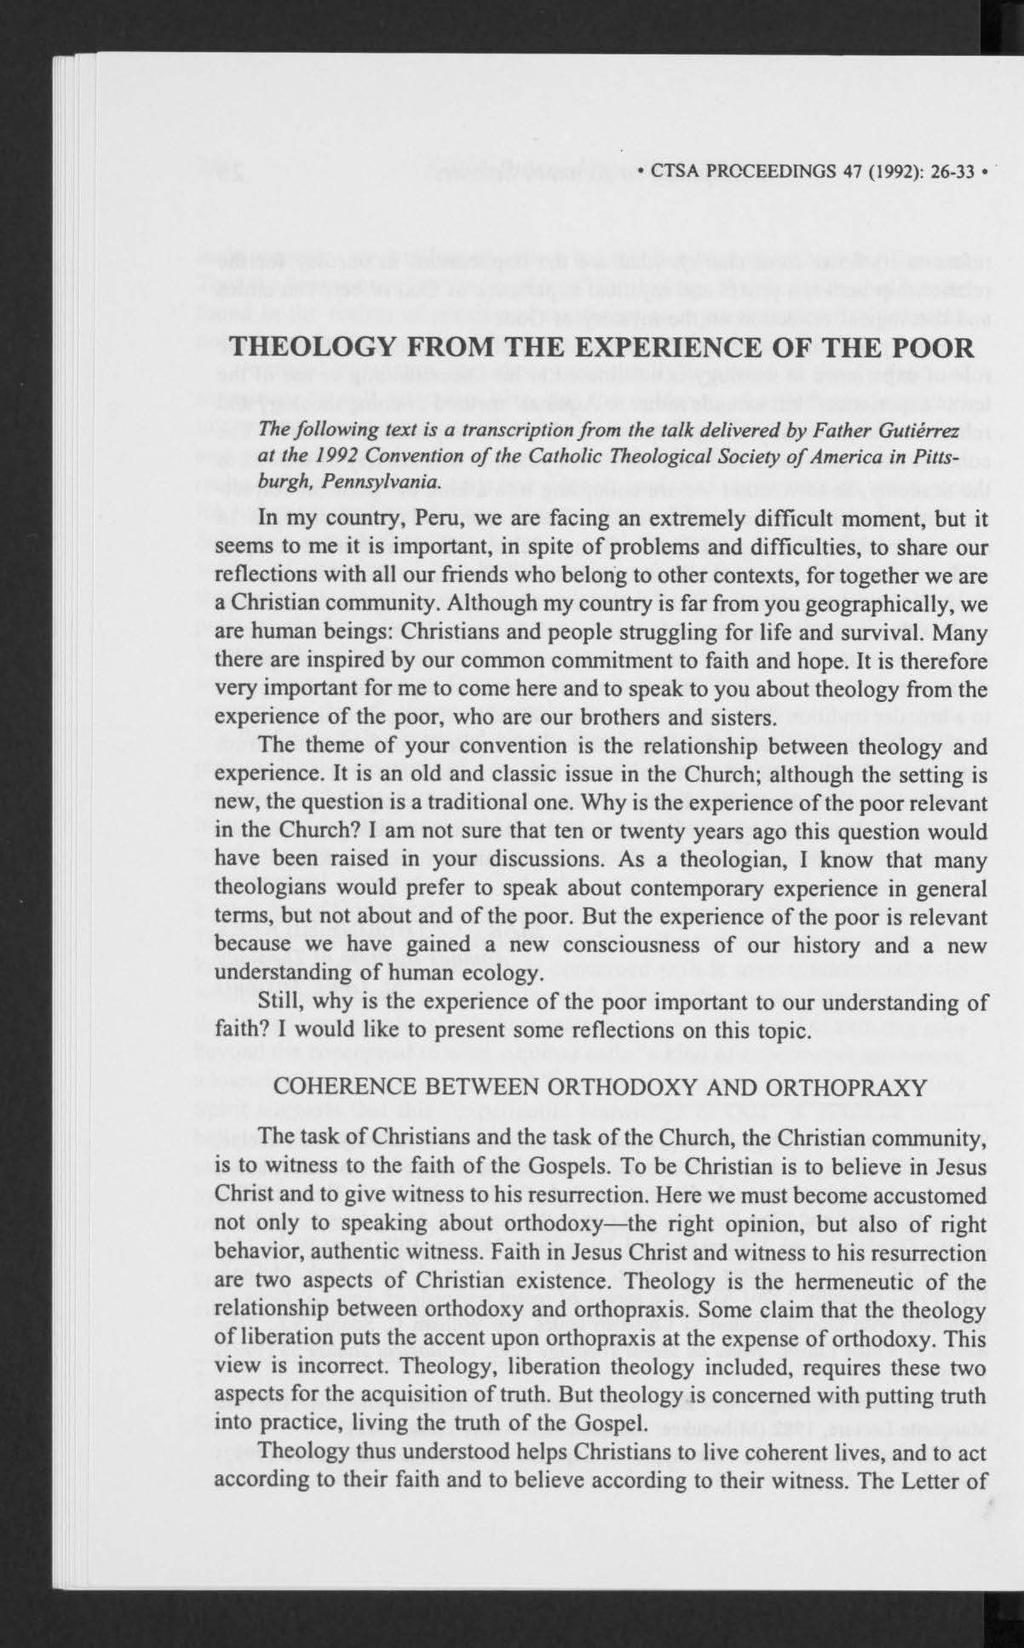 CTSA PROCEEDINGS 47 (1992): 26-33 THEOLOGY FROM THE EXPERIENCE OF THE POOR The following text is a transcription from the talk delivered by Father Gutiérrez at the 1992 Convention of the Catholic